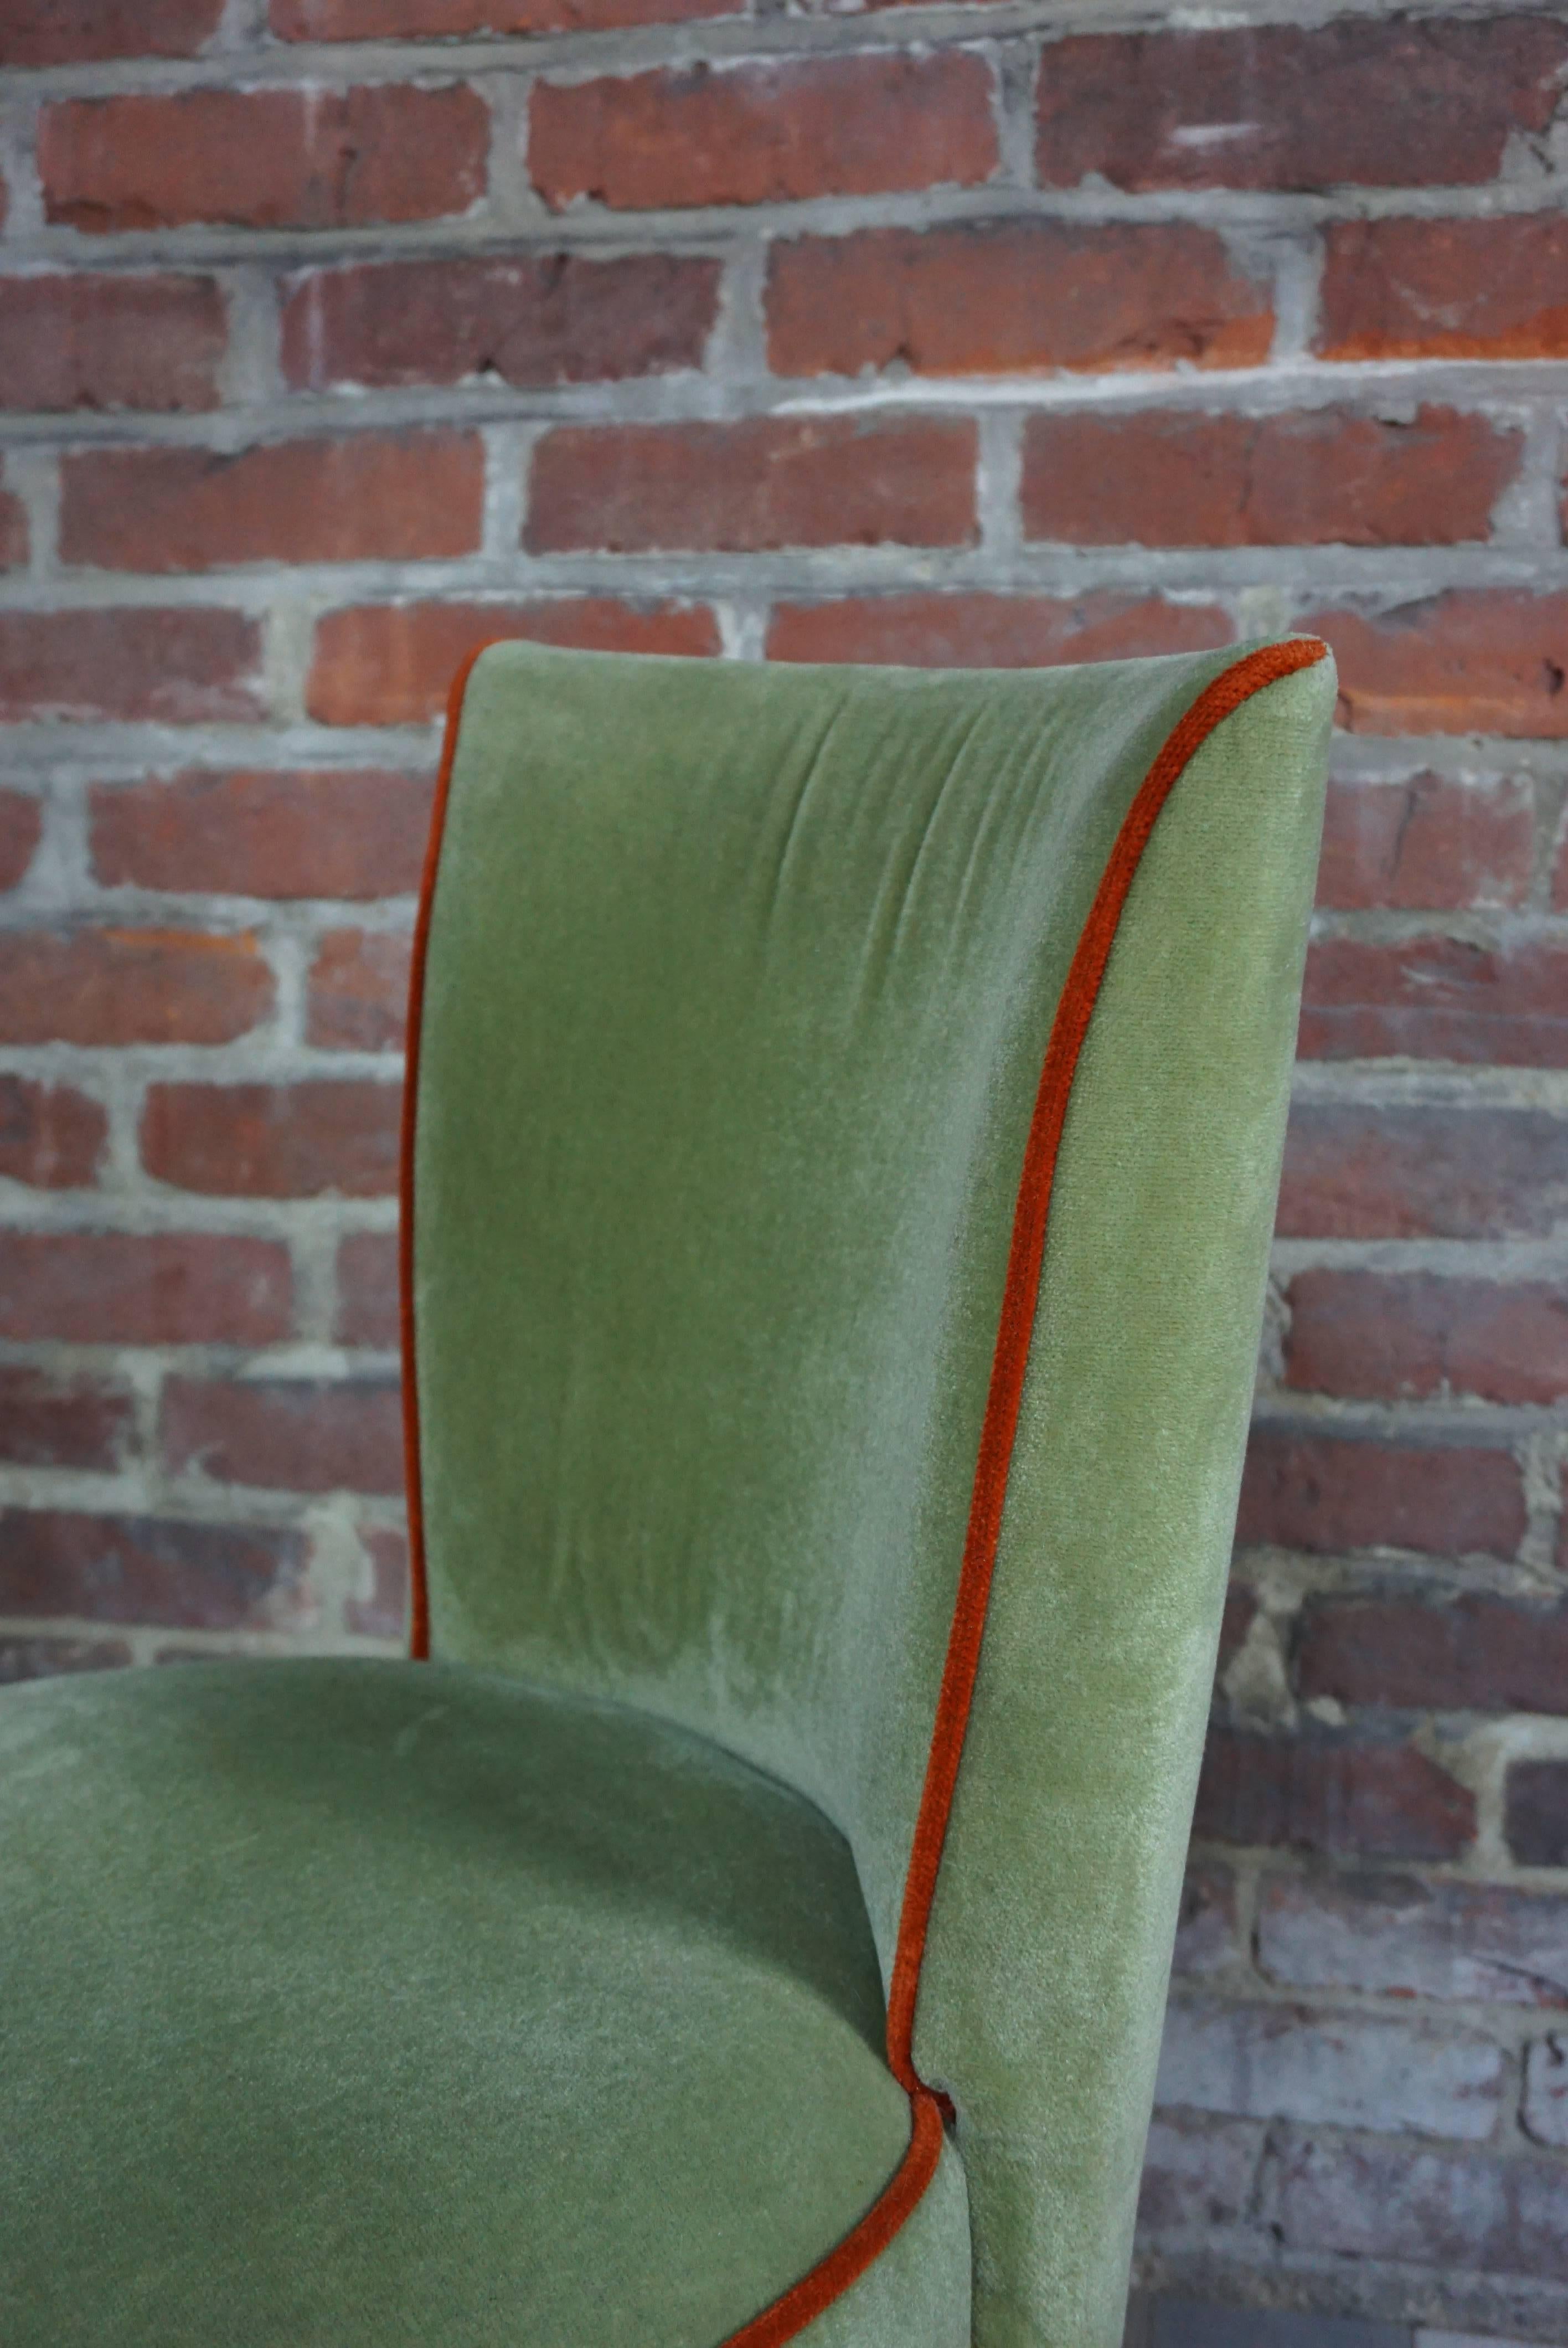 Cocktail lounge chair in toad style very deco, chic and design. Green velvet almond and orange cord. Comfortable seat and all in perfect condition.